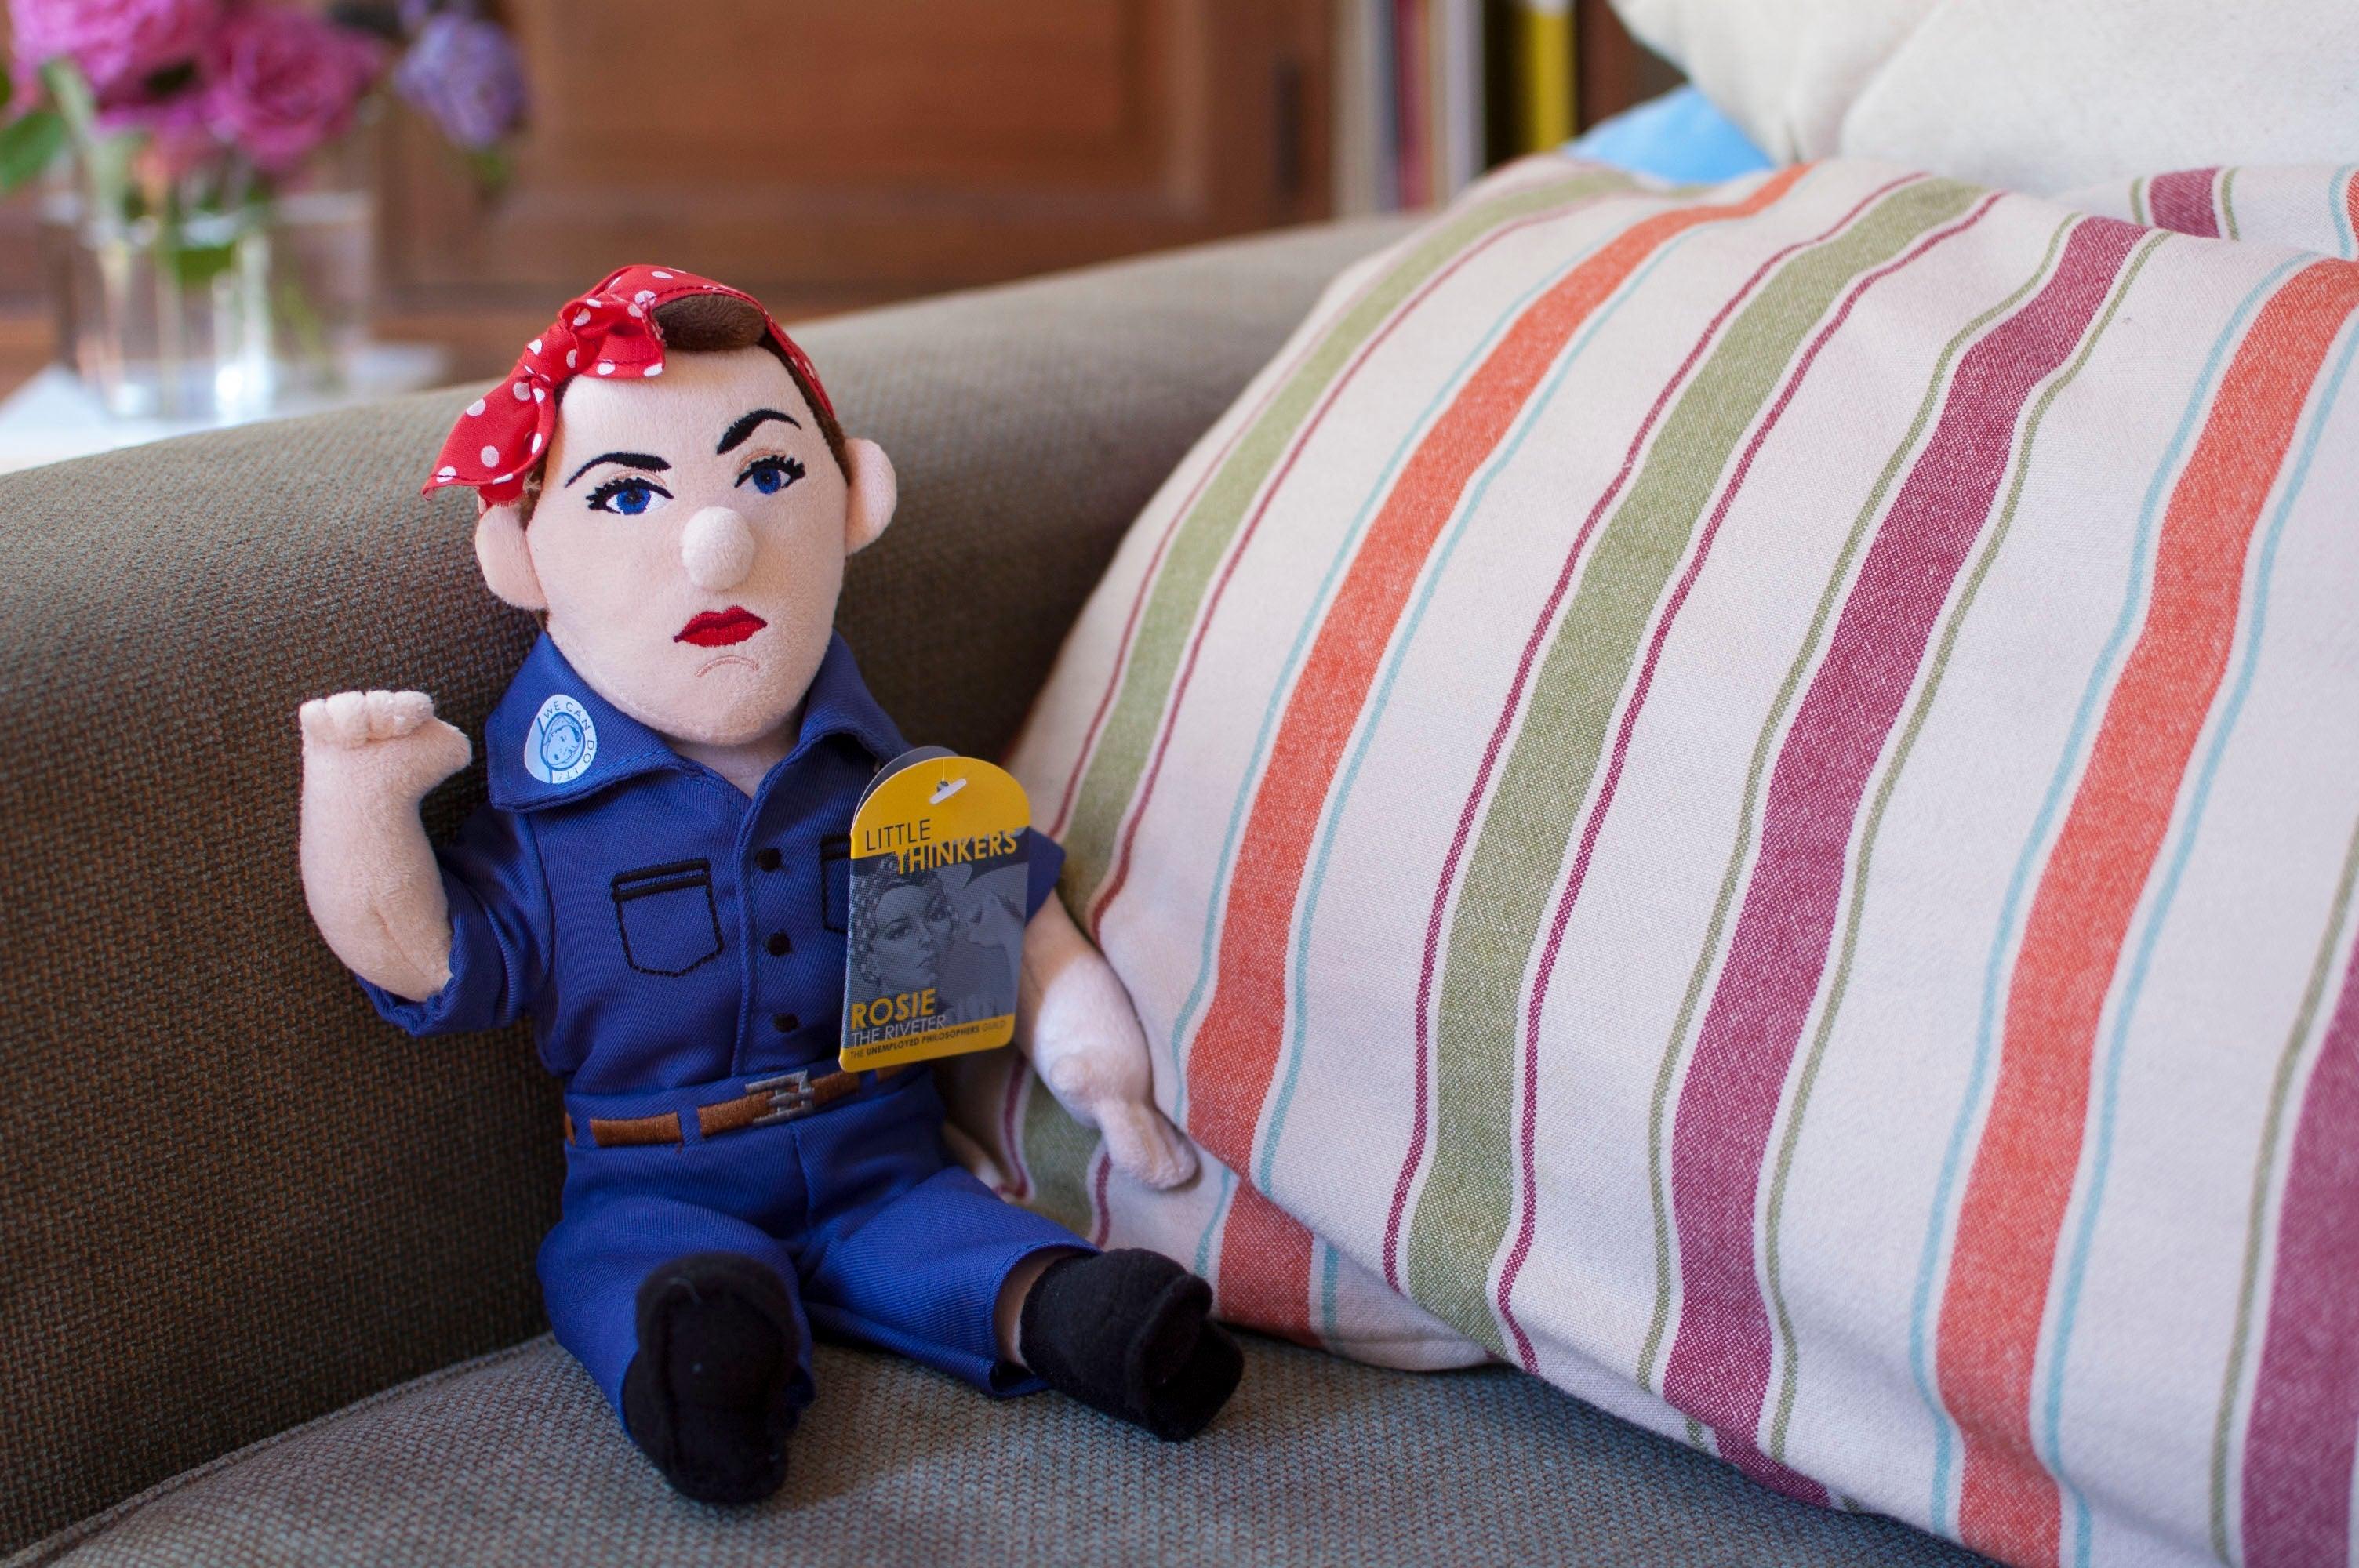 Product photo of Rosie the Riveter Plush Doll, a novelty gift manufactured by The Unemployed Philosophers Guild.